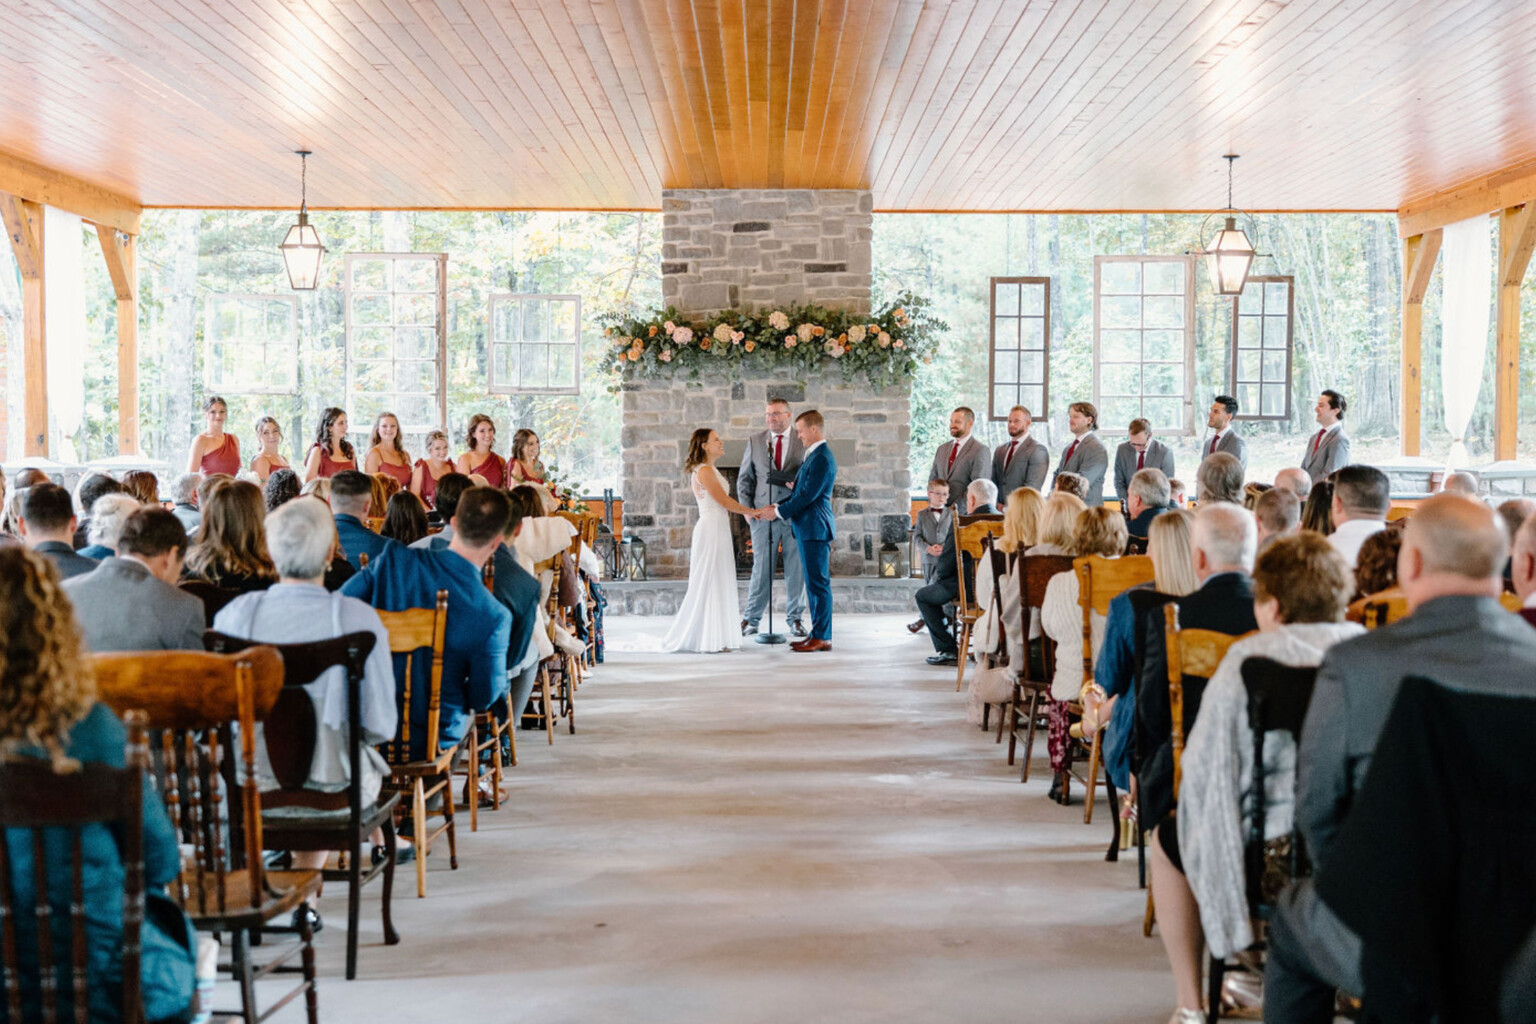 Ceremony in the woodland pavilion